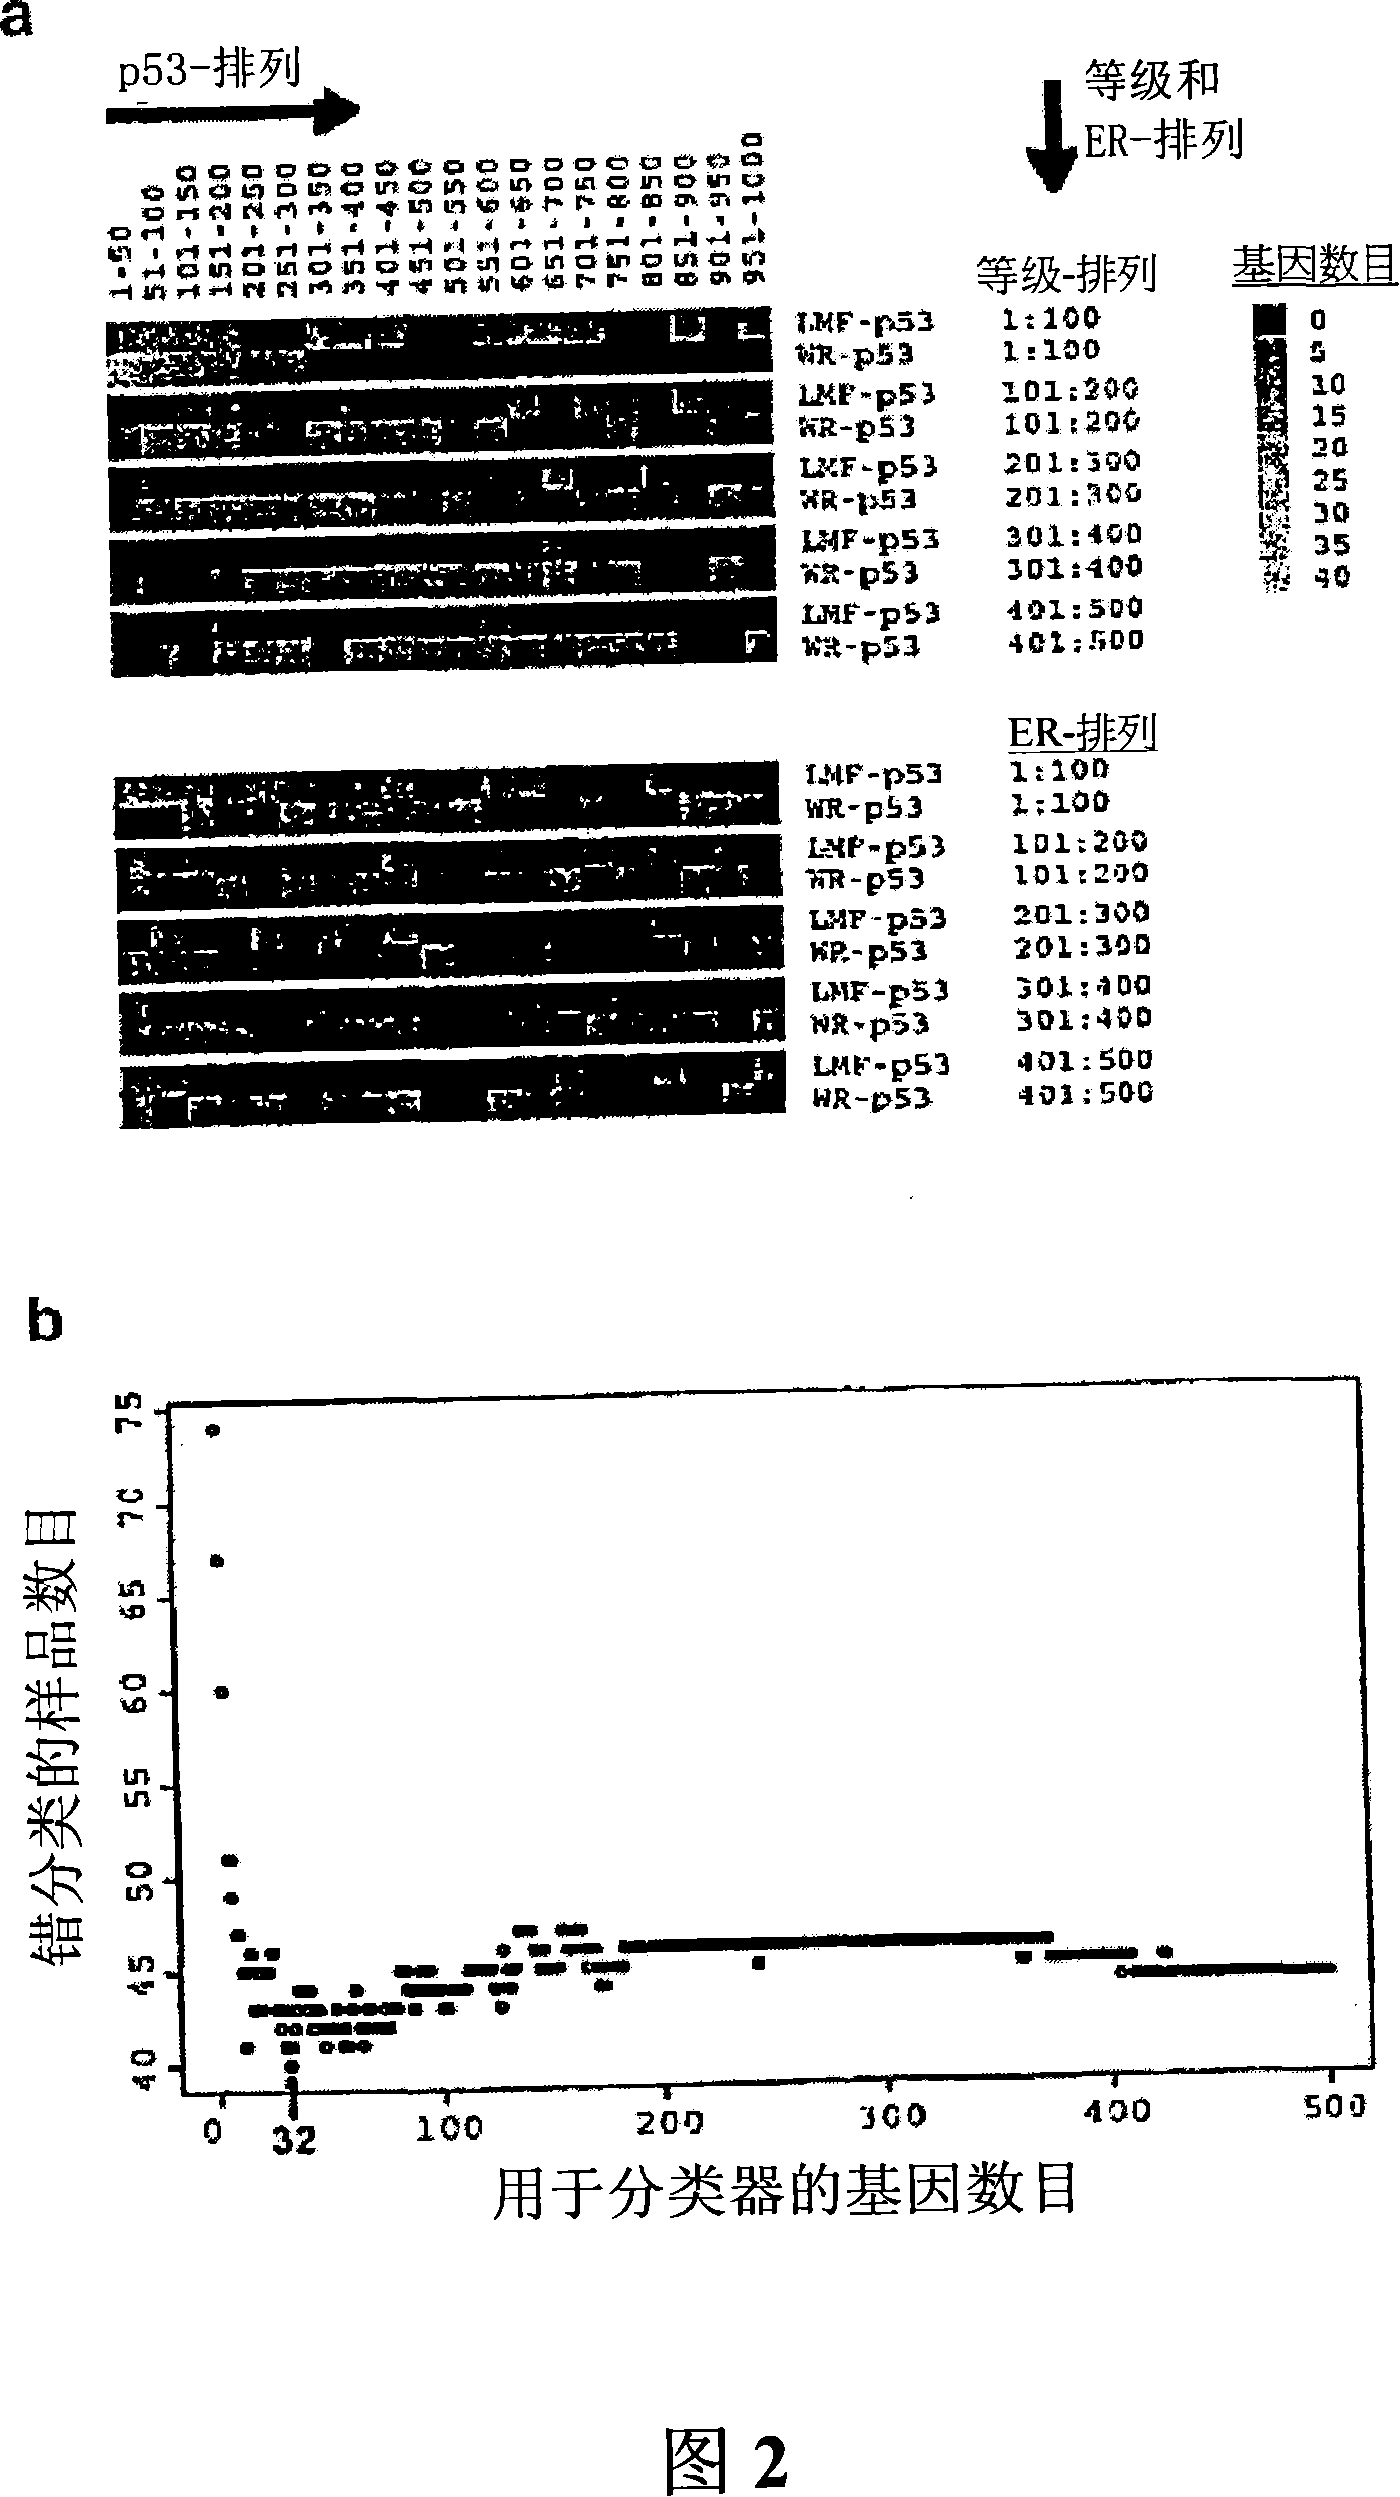 Methods, systems, and arrays based on correlating p53 status with gene expression profiles, for classification, prognosis, and diagnosis of cancers